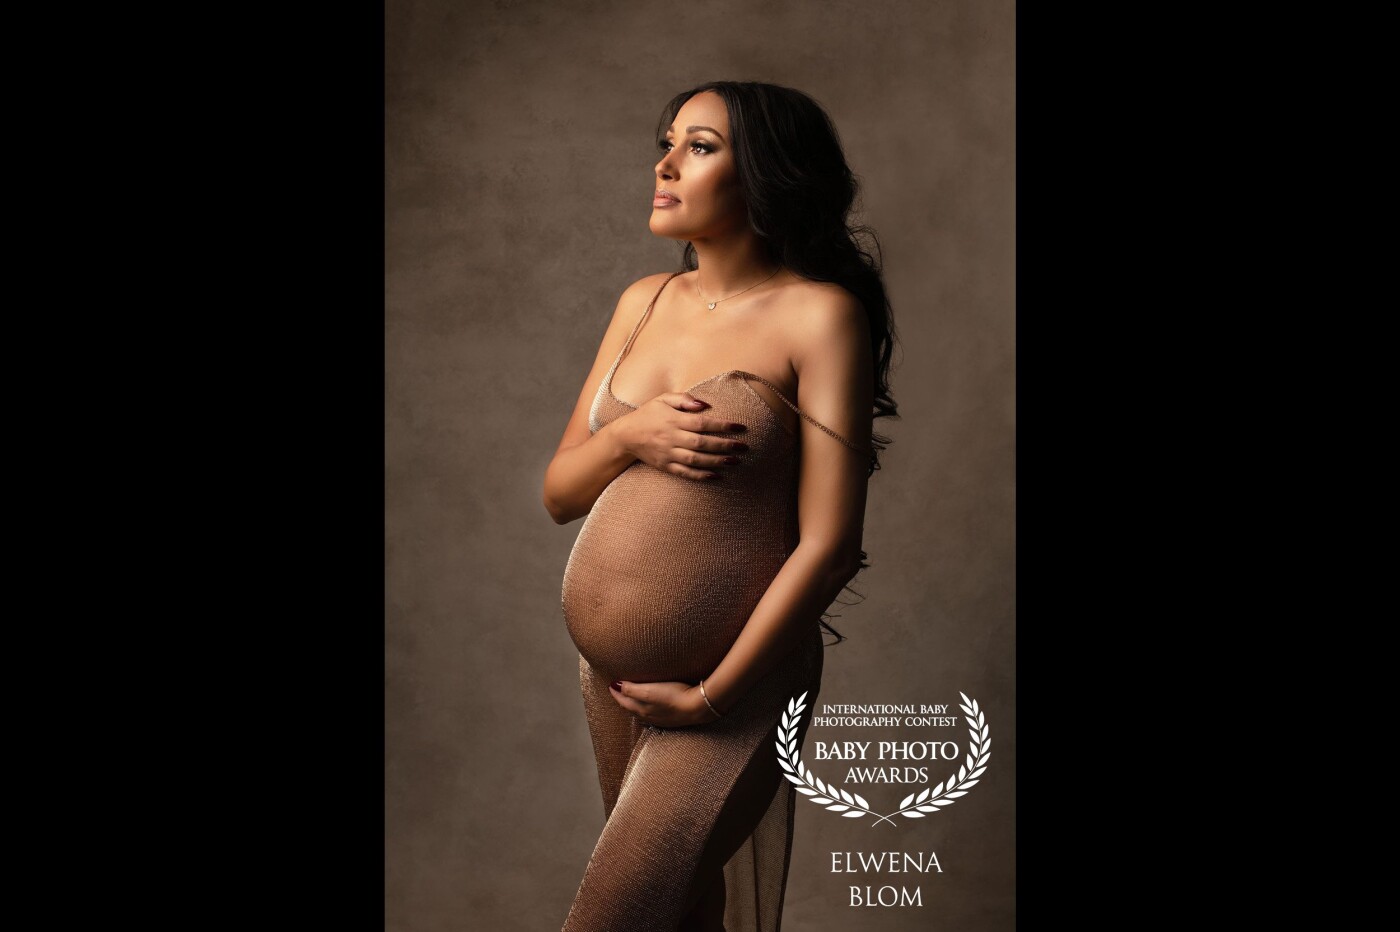 This gorgeous Mom-to-be was just absolutely glowing in this gold metallic dress. I love the delicateness of the dress, the strap falling off the shoulder, and just a tender, serene moment captured.